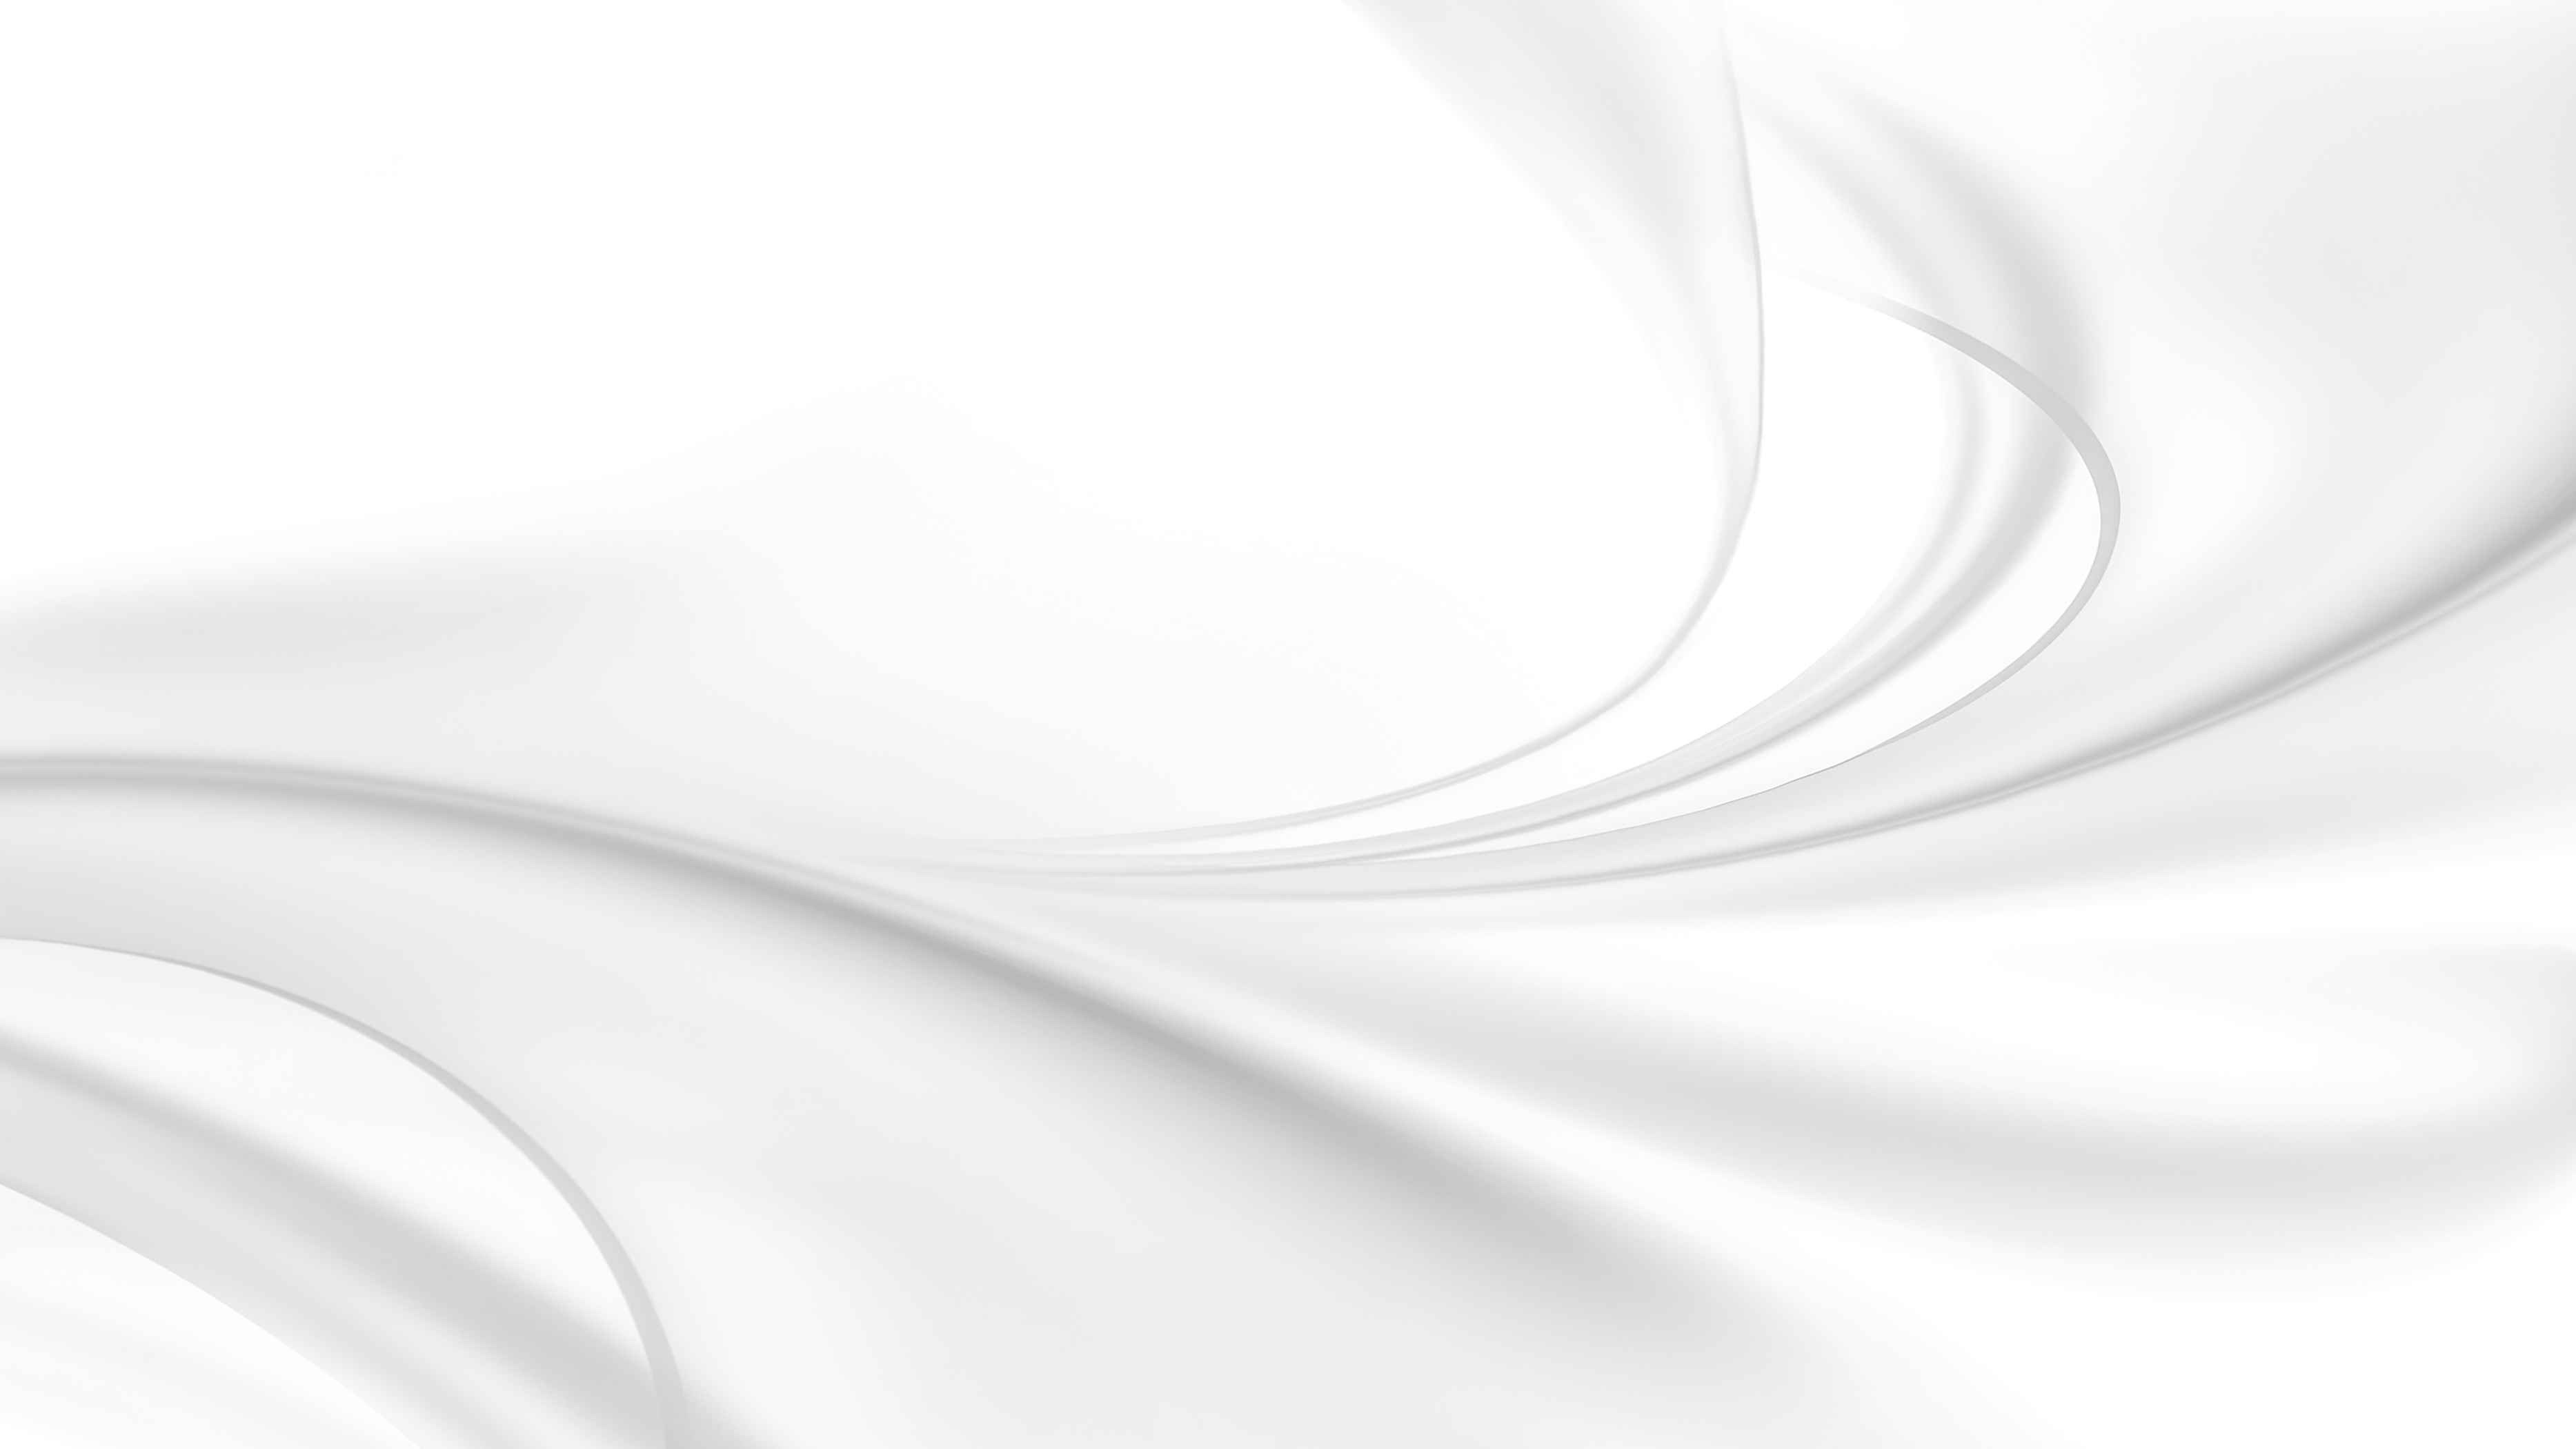 abstract white background - NEWBT